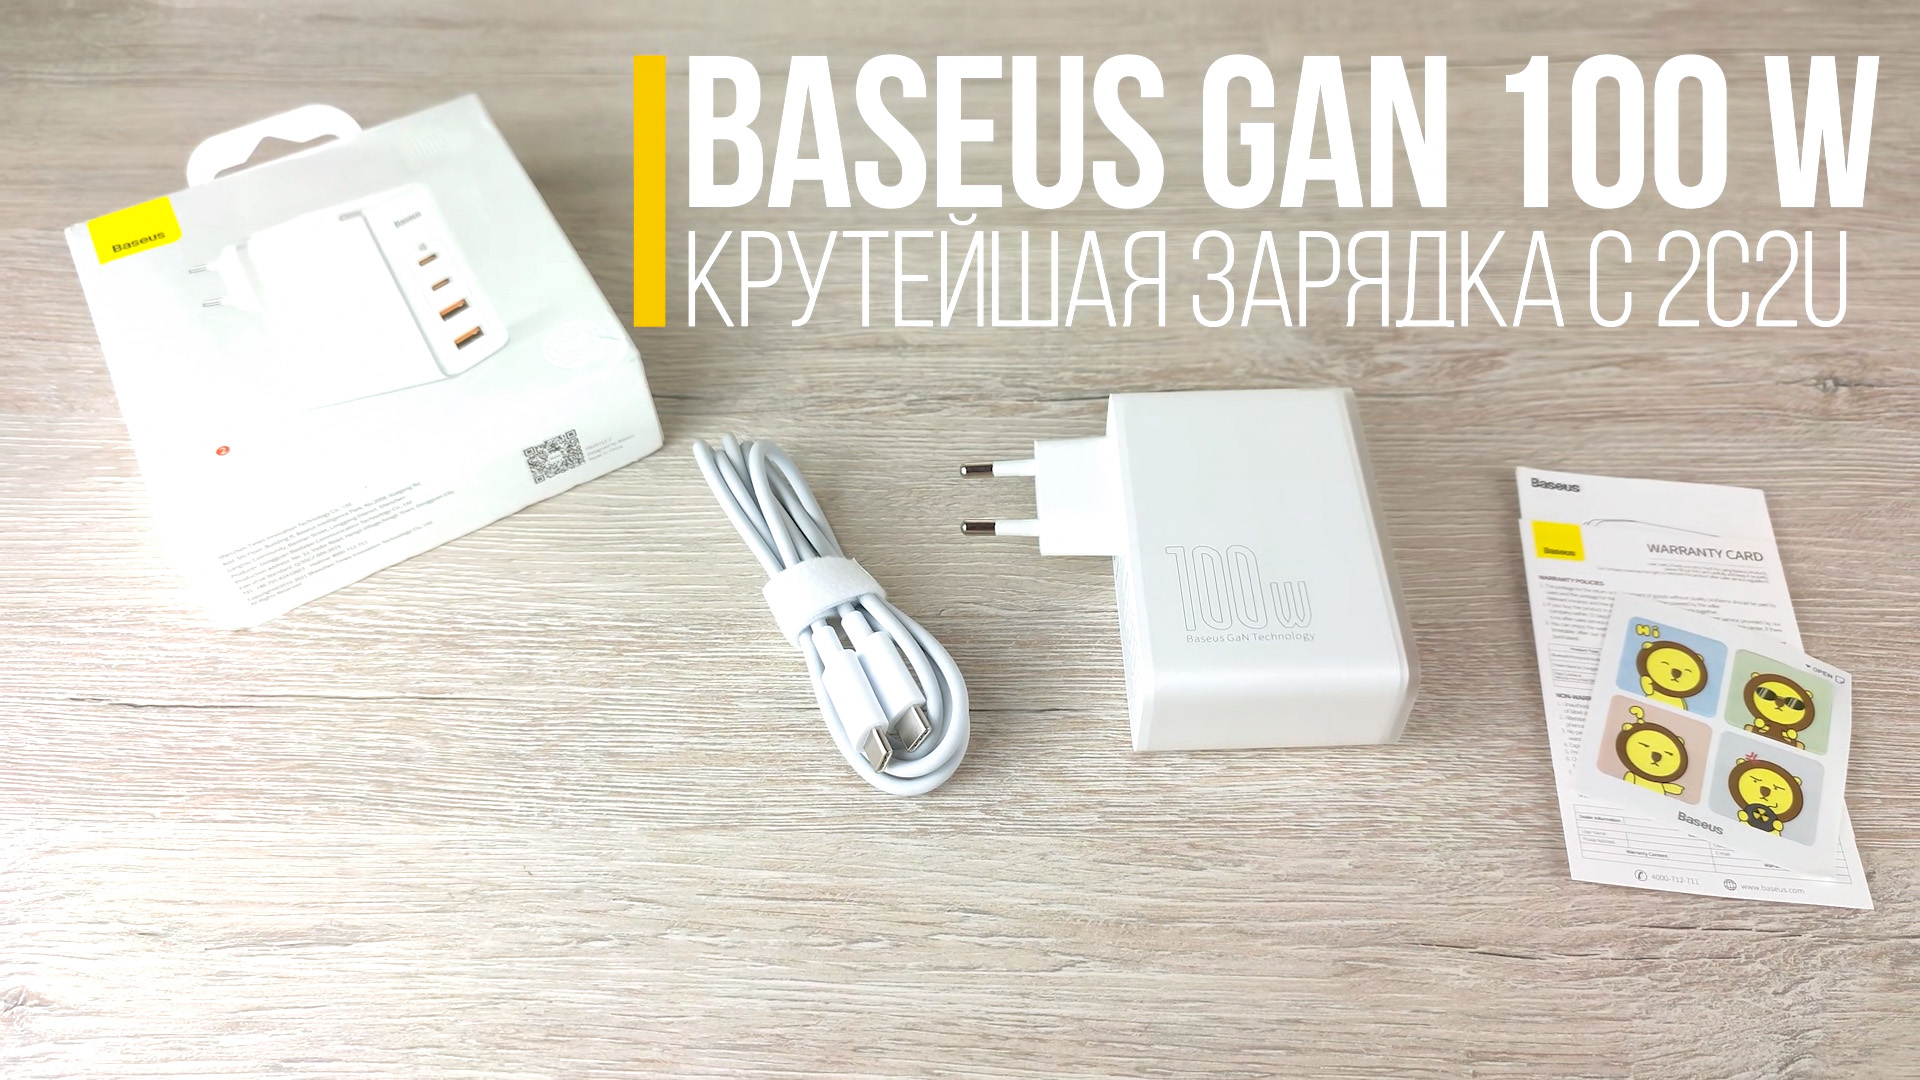 Overview of the Baseus GaN 100W 4 Port Charger ⋆ 1